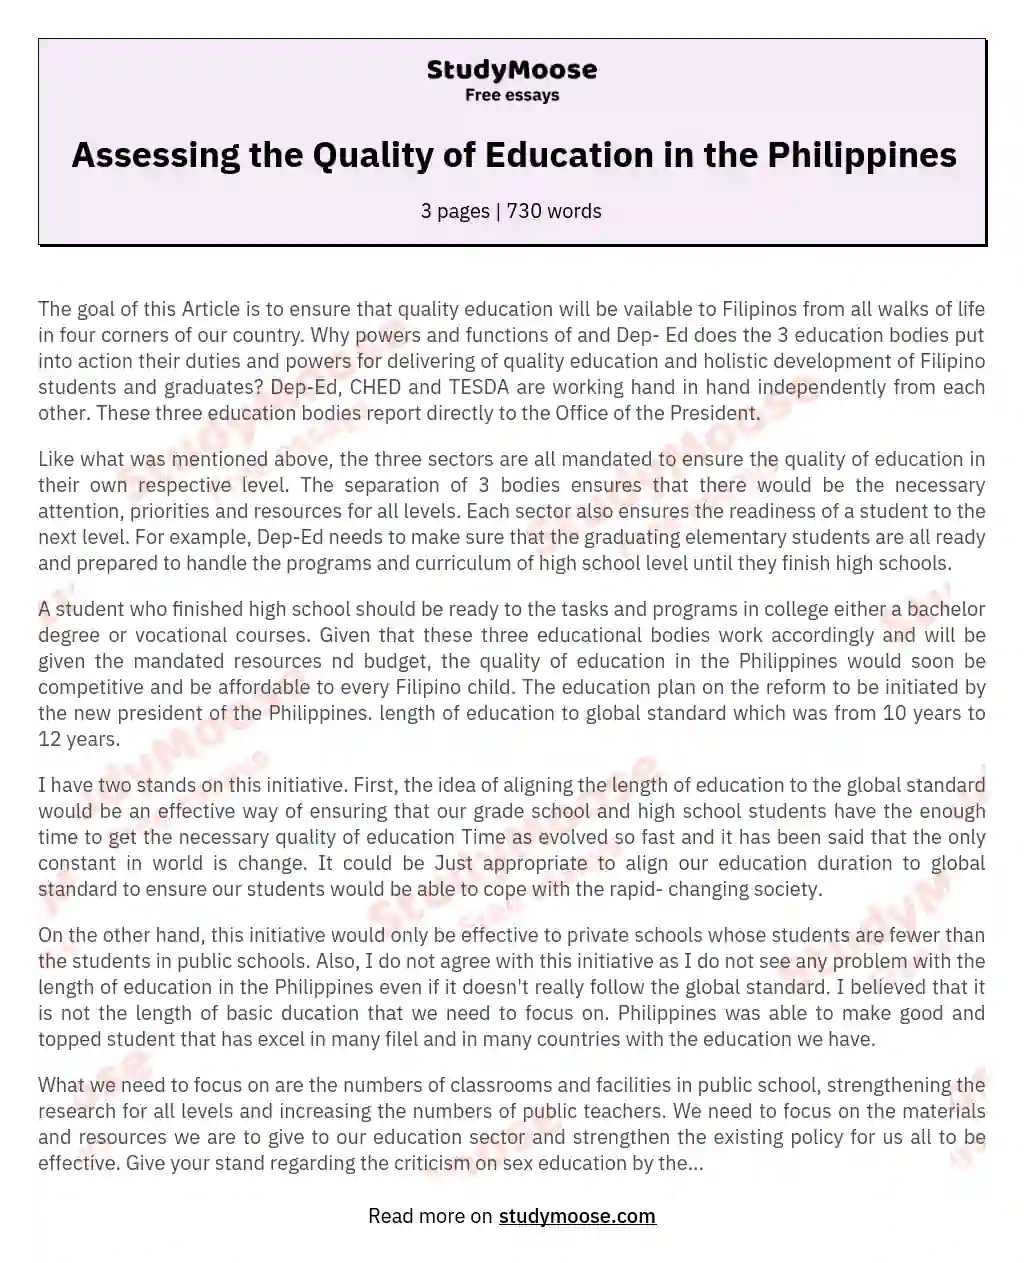 Assessing the Quality of Education in the Philippines essay